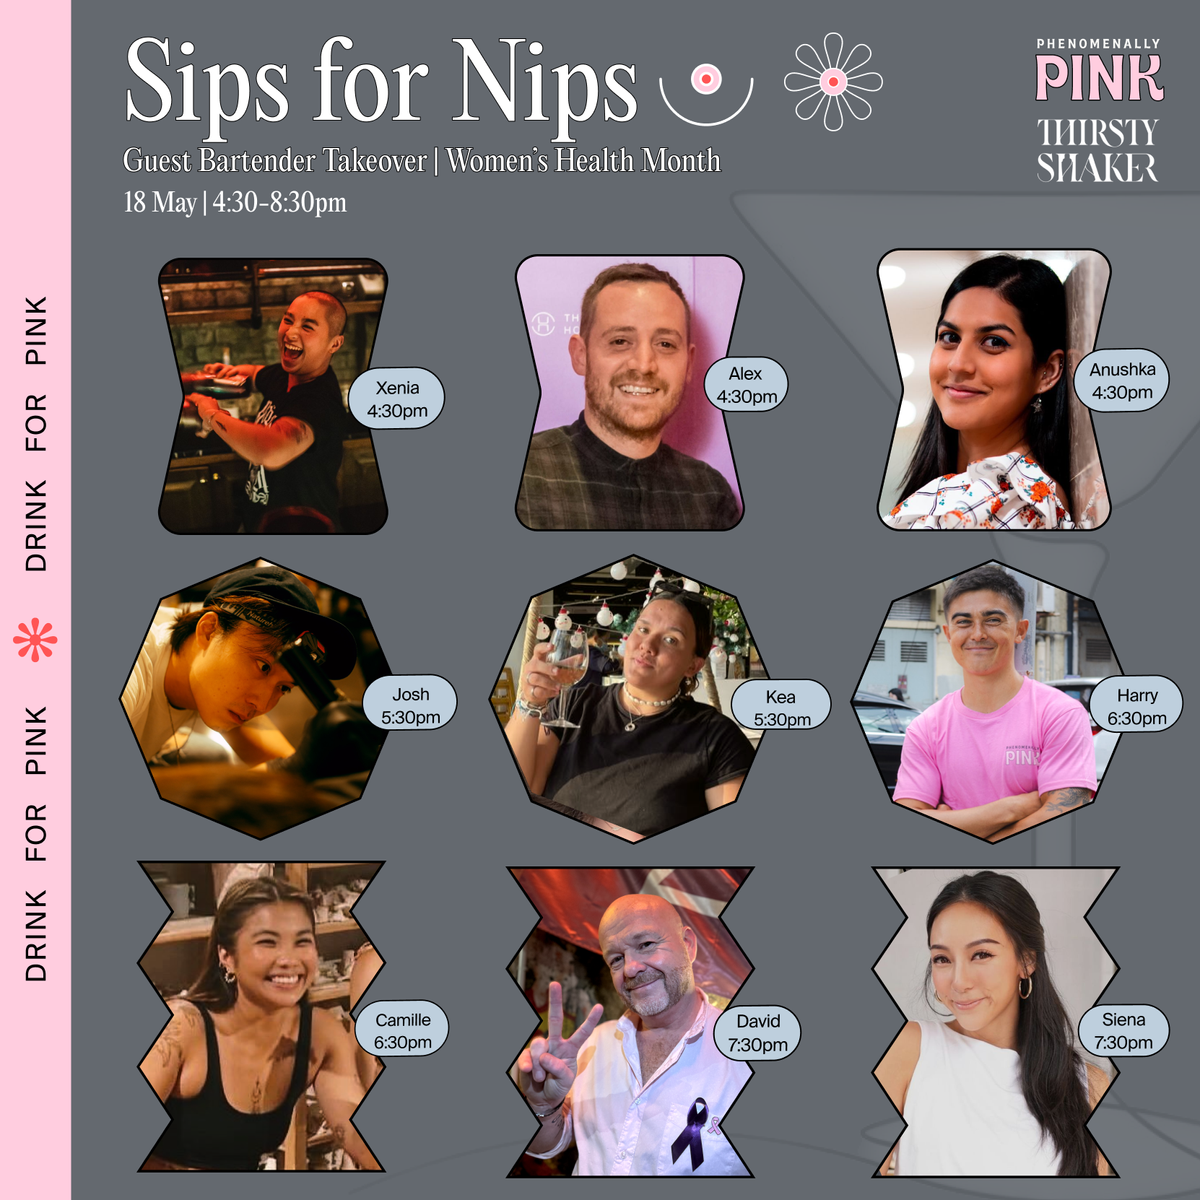 Phenomenally Pink hosts Sips for Nips in support of women's health